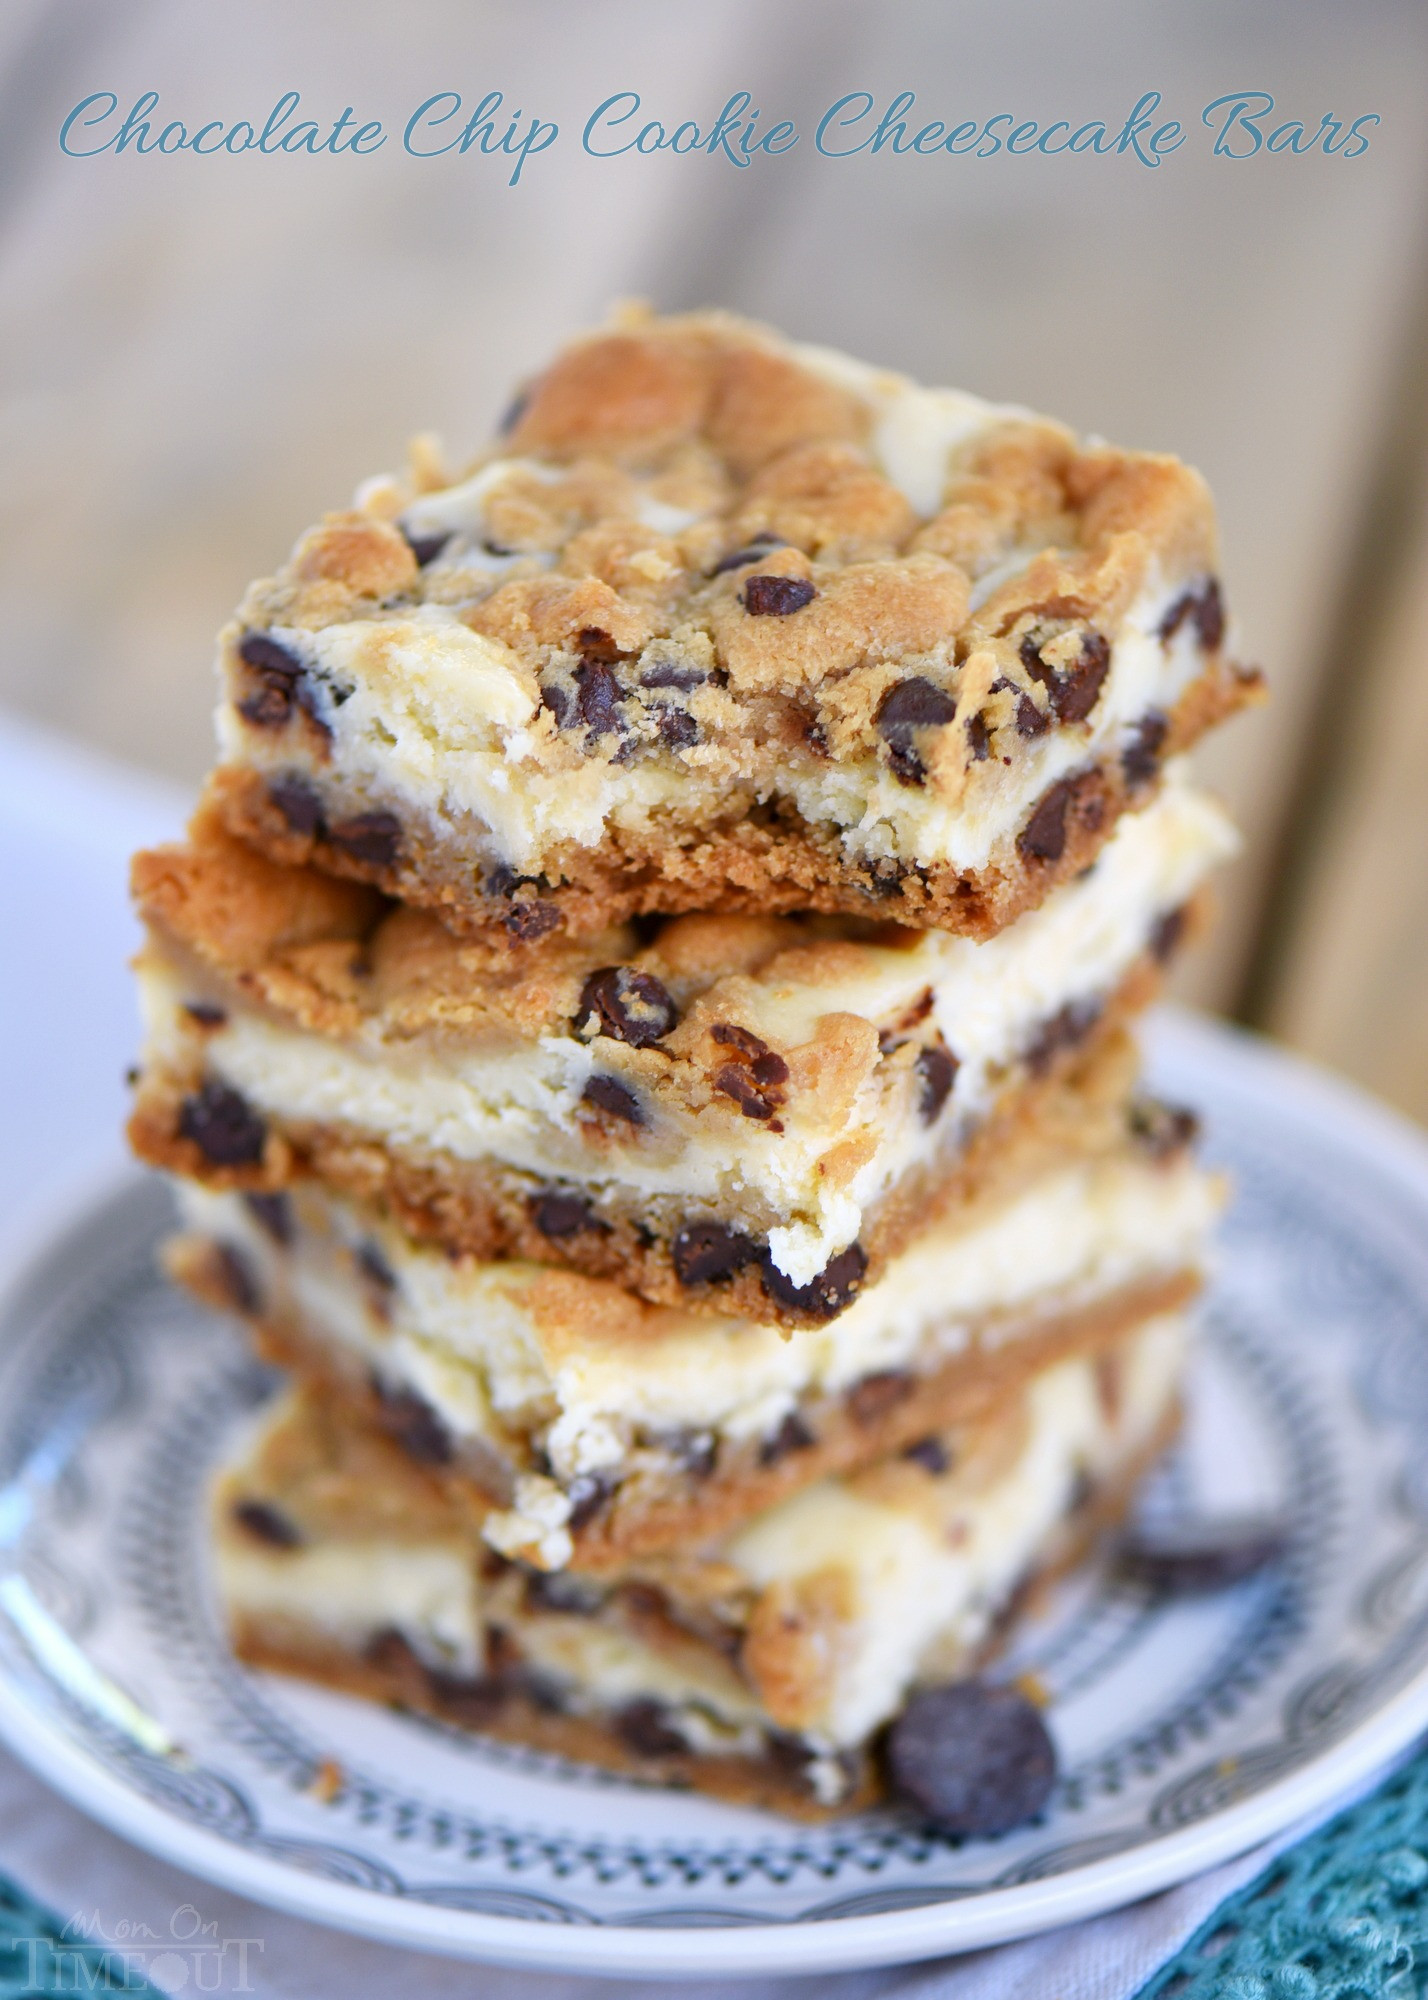 Easy Desserts With Chocolate Chips
 Chocolate Chip Cookie Cheesecake Bars Mom Timeout